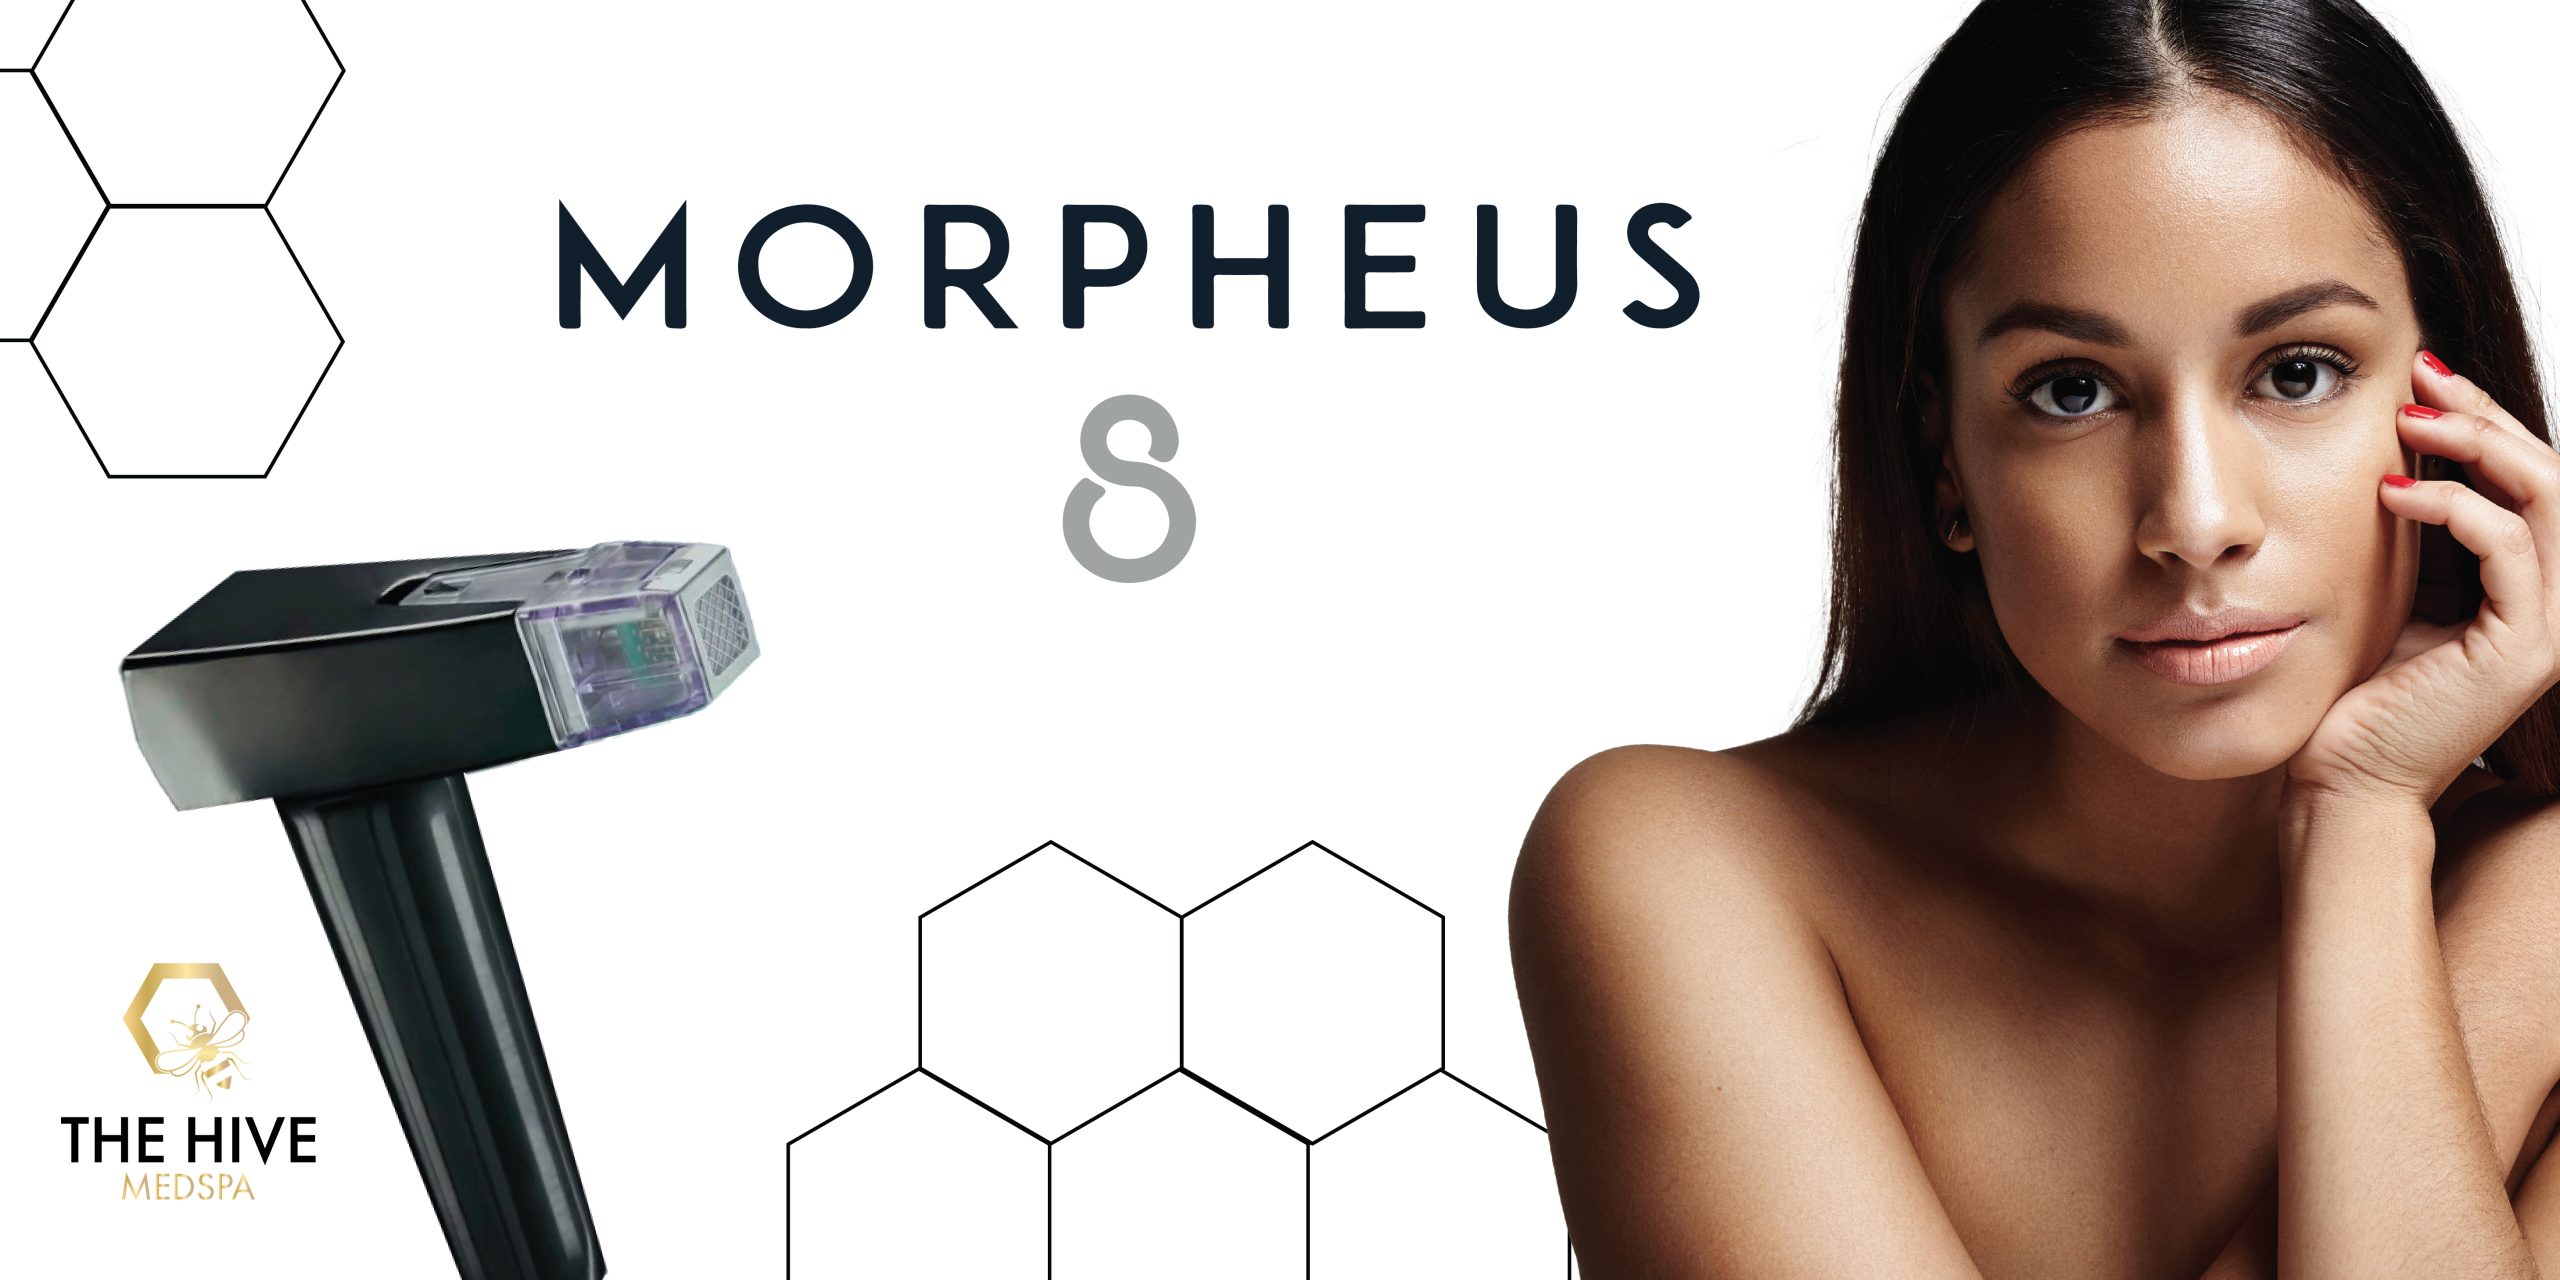 morpheus 8 treatment at the hive med spa